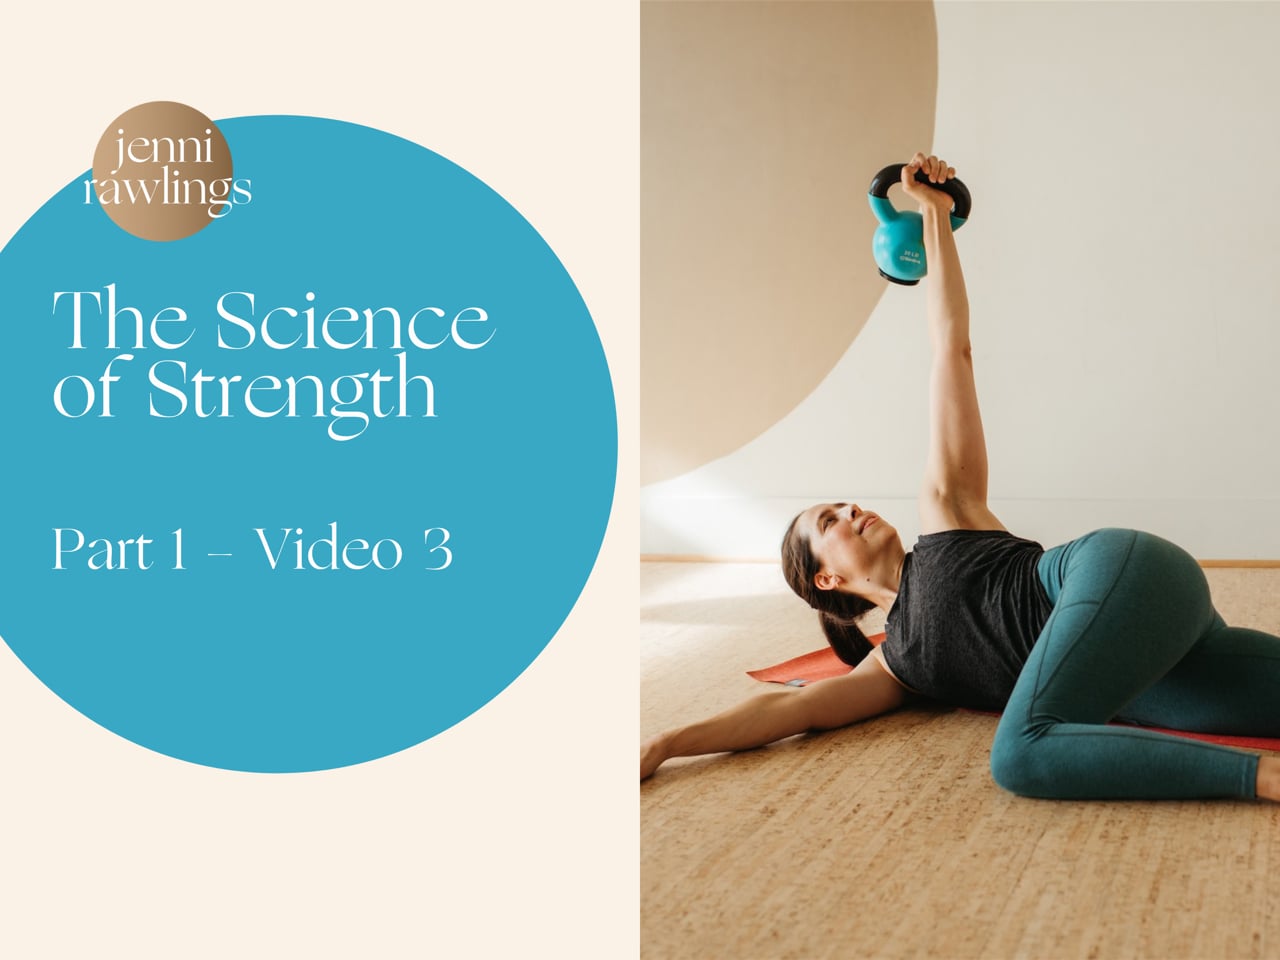 The Science of Strength Part 1, Video 3